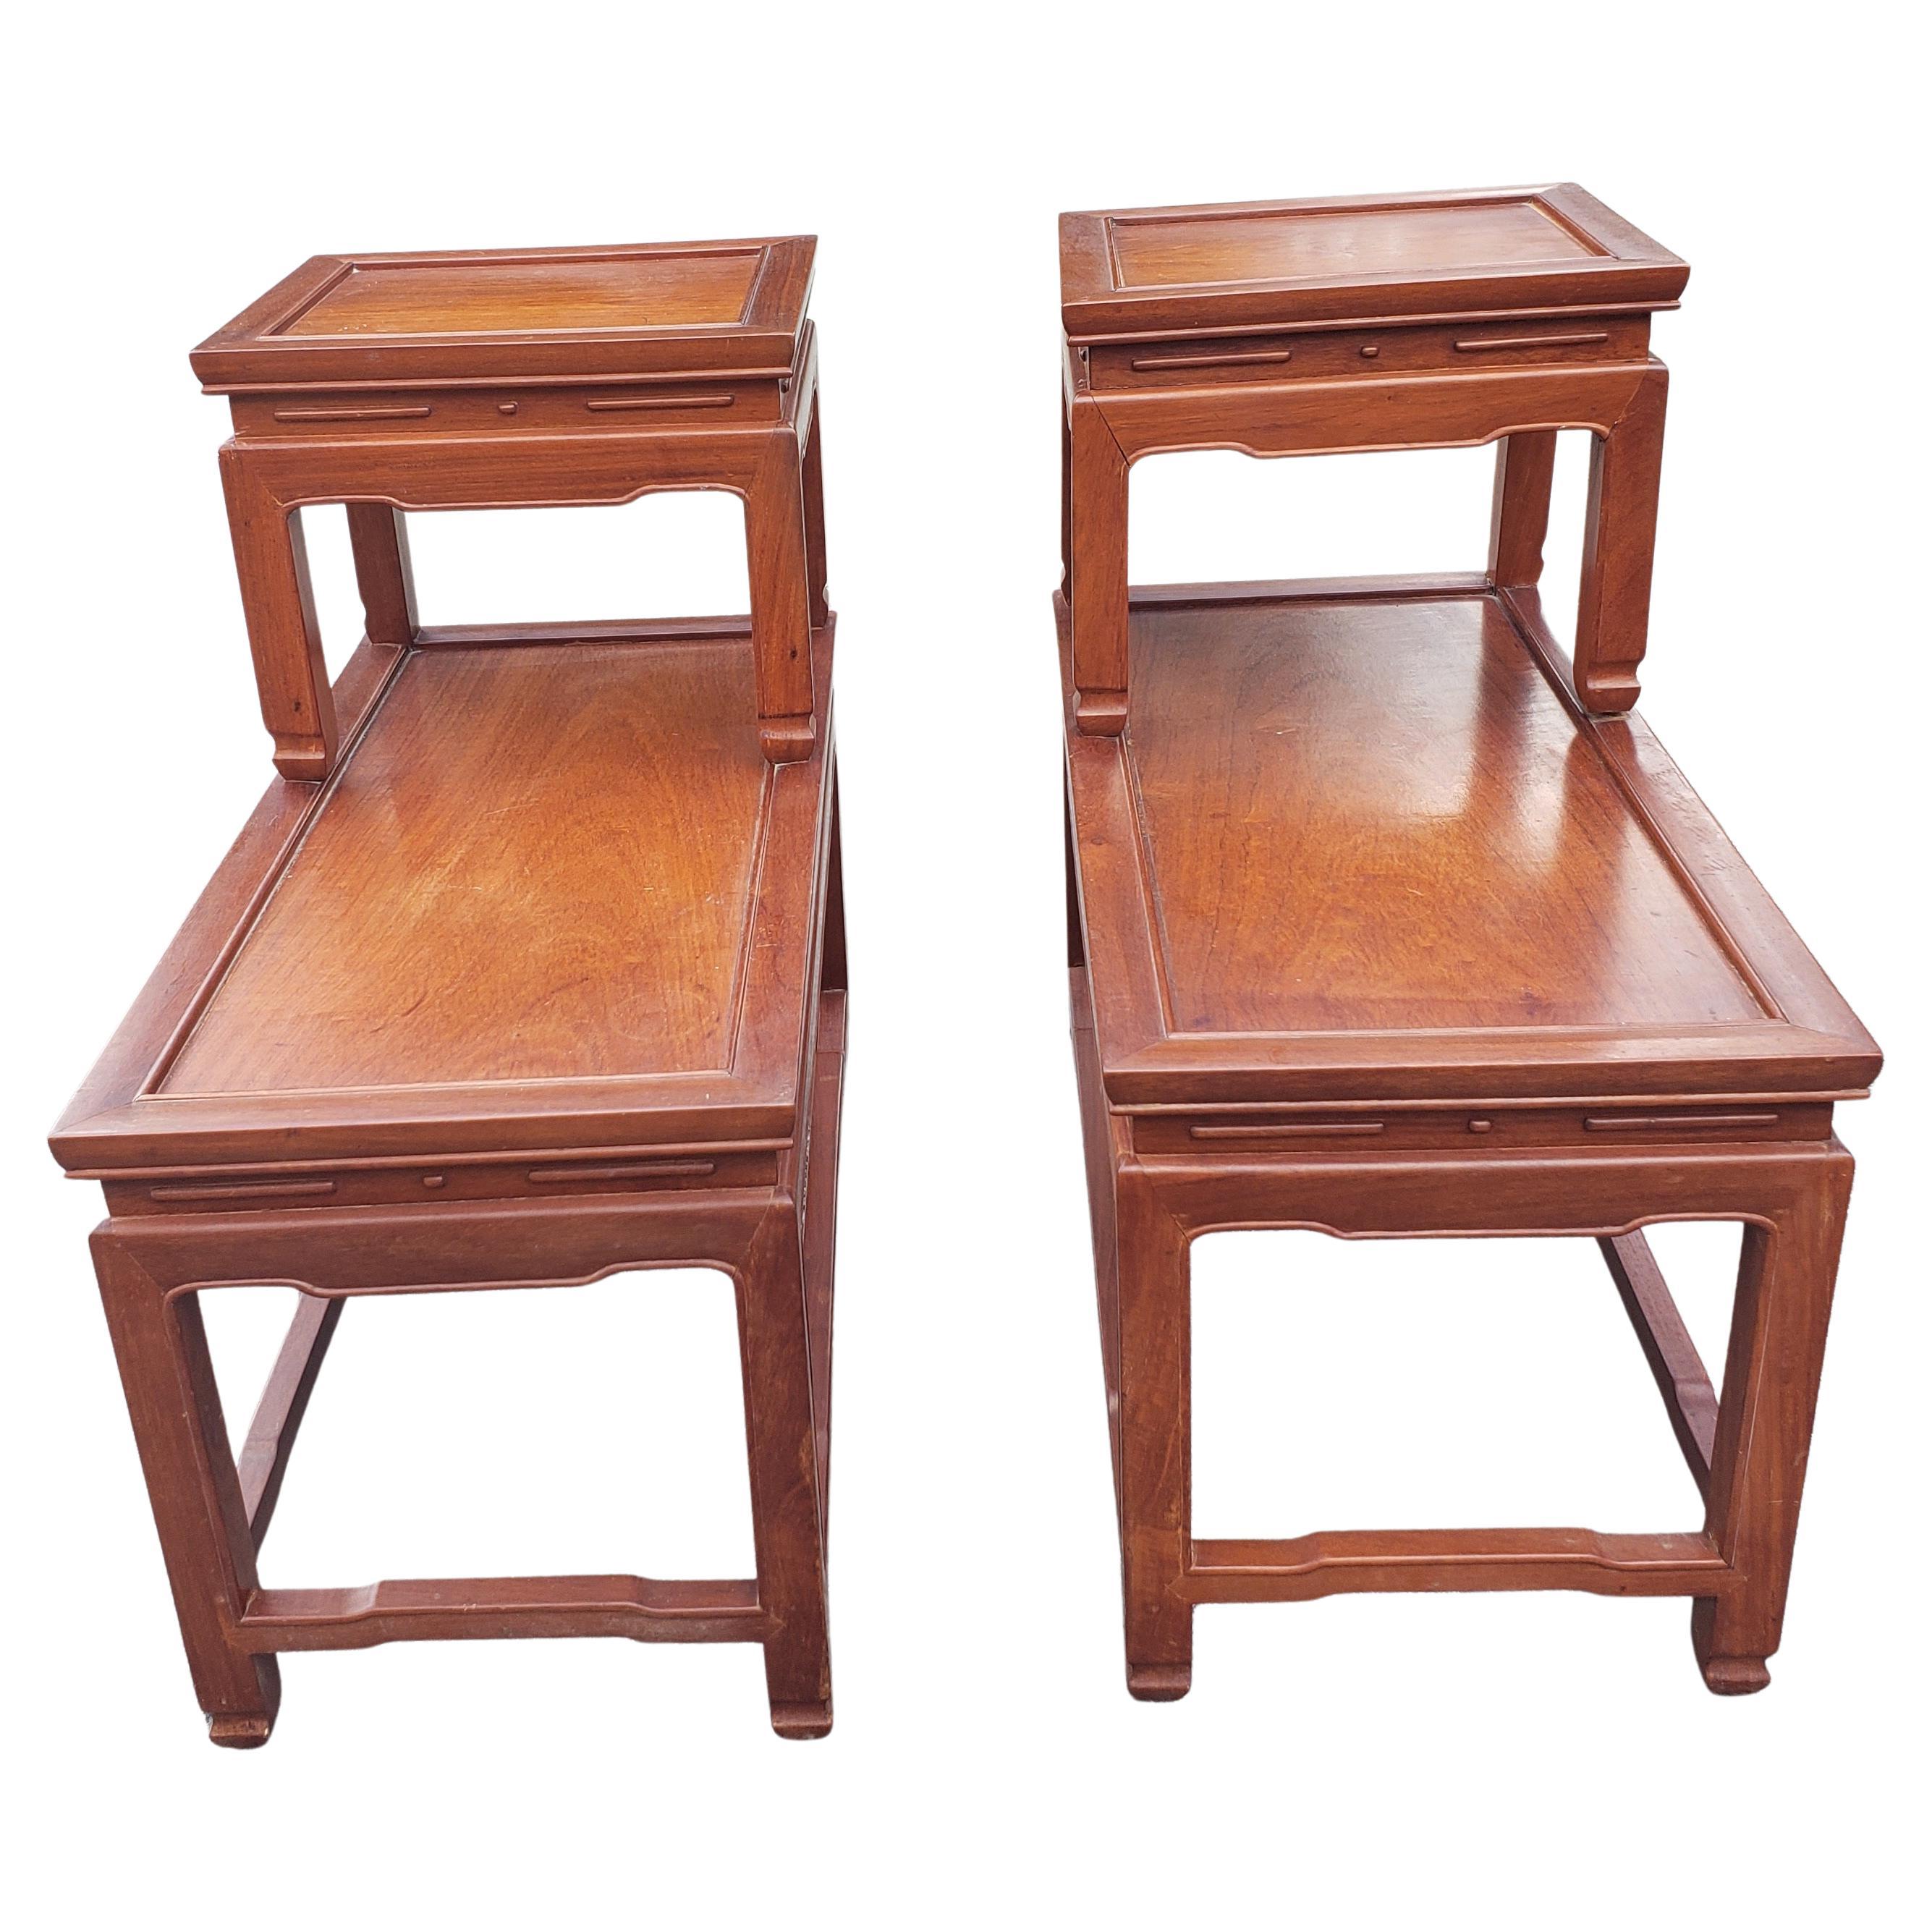 Woodwork Pair of George Zee Two Tier Rosewood End Tables, circa 1960s For Sale